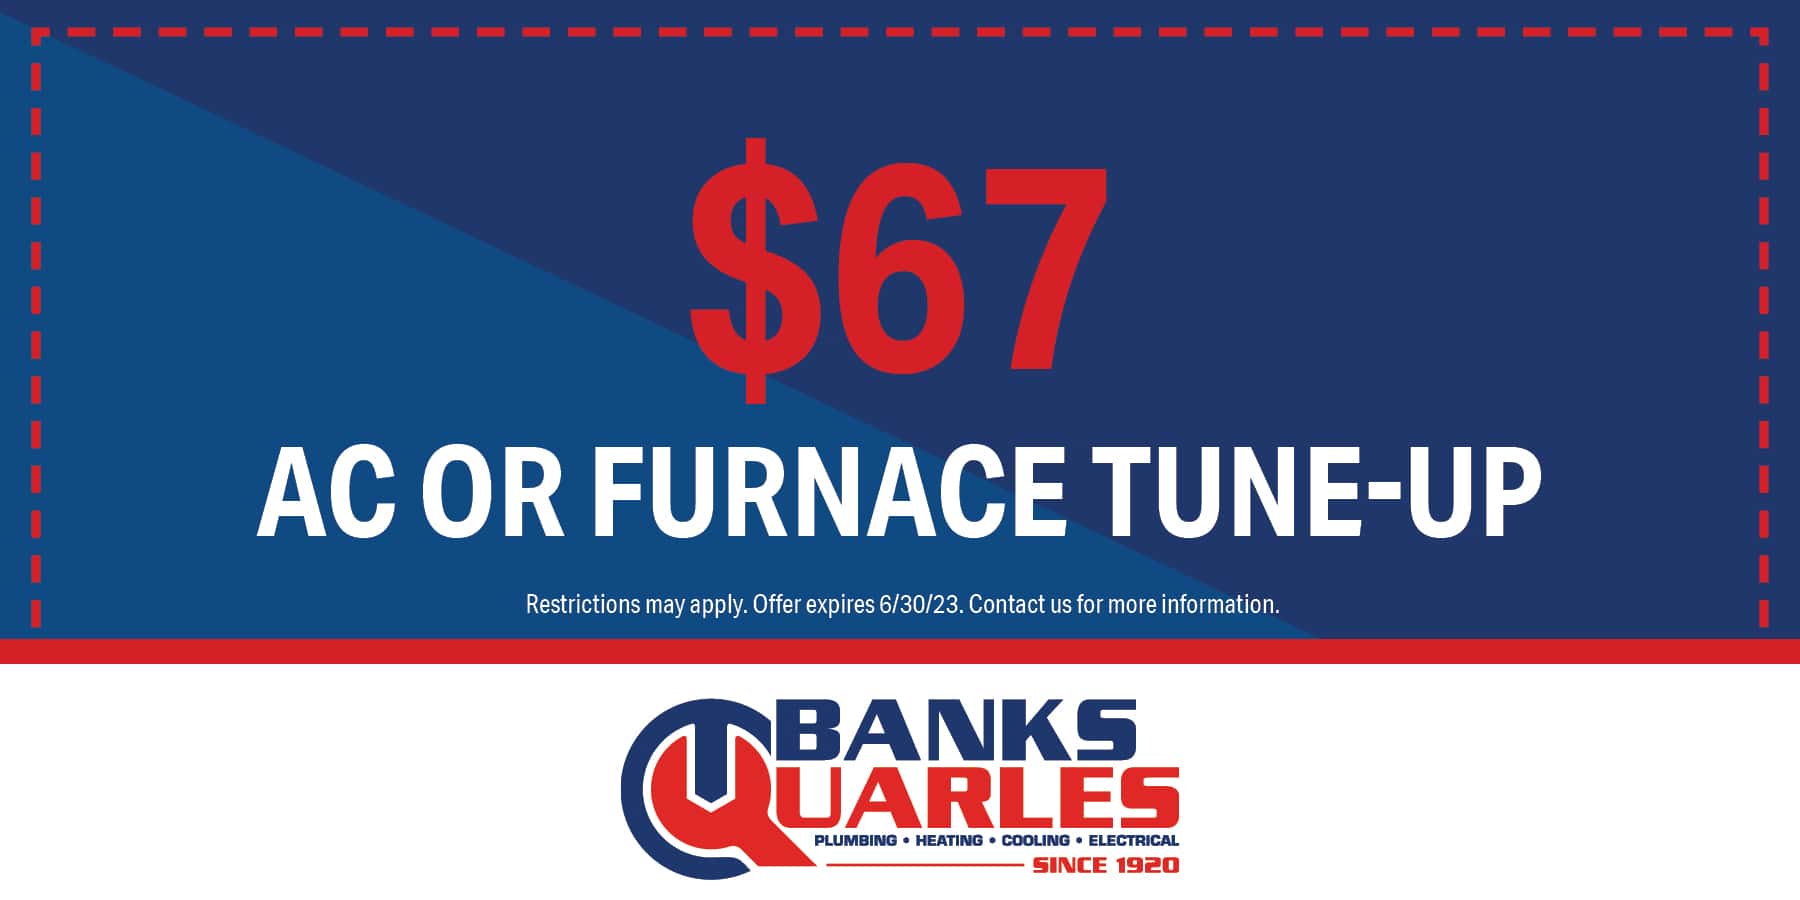 $67 AC/Furnace Tune-Up. Restrictions may apply. Contact us for details.